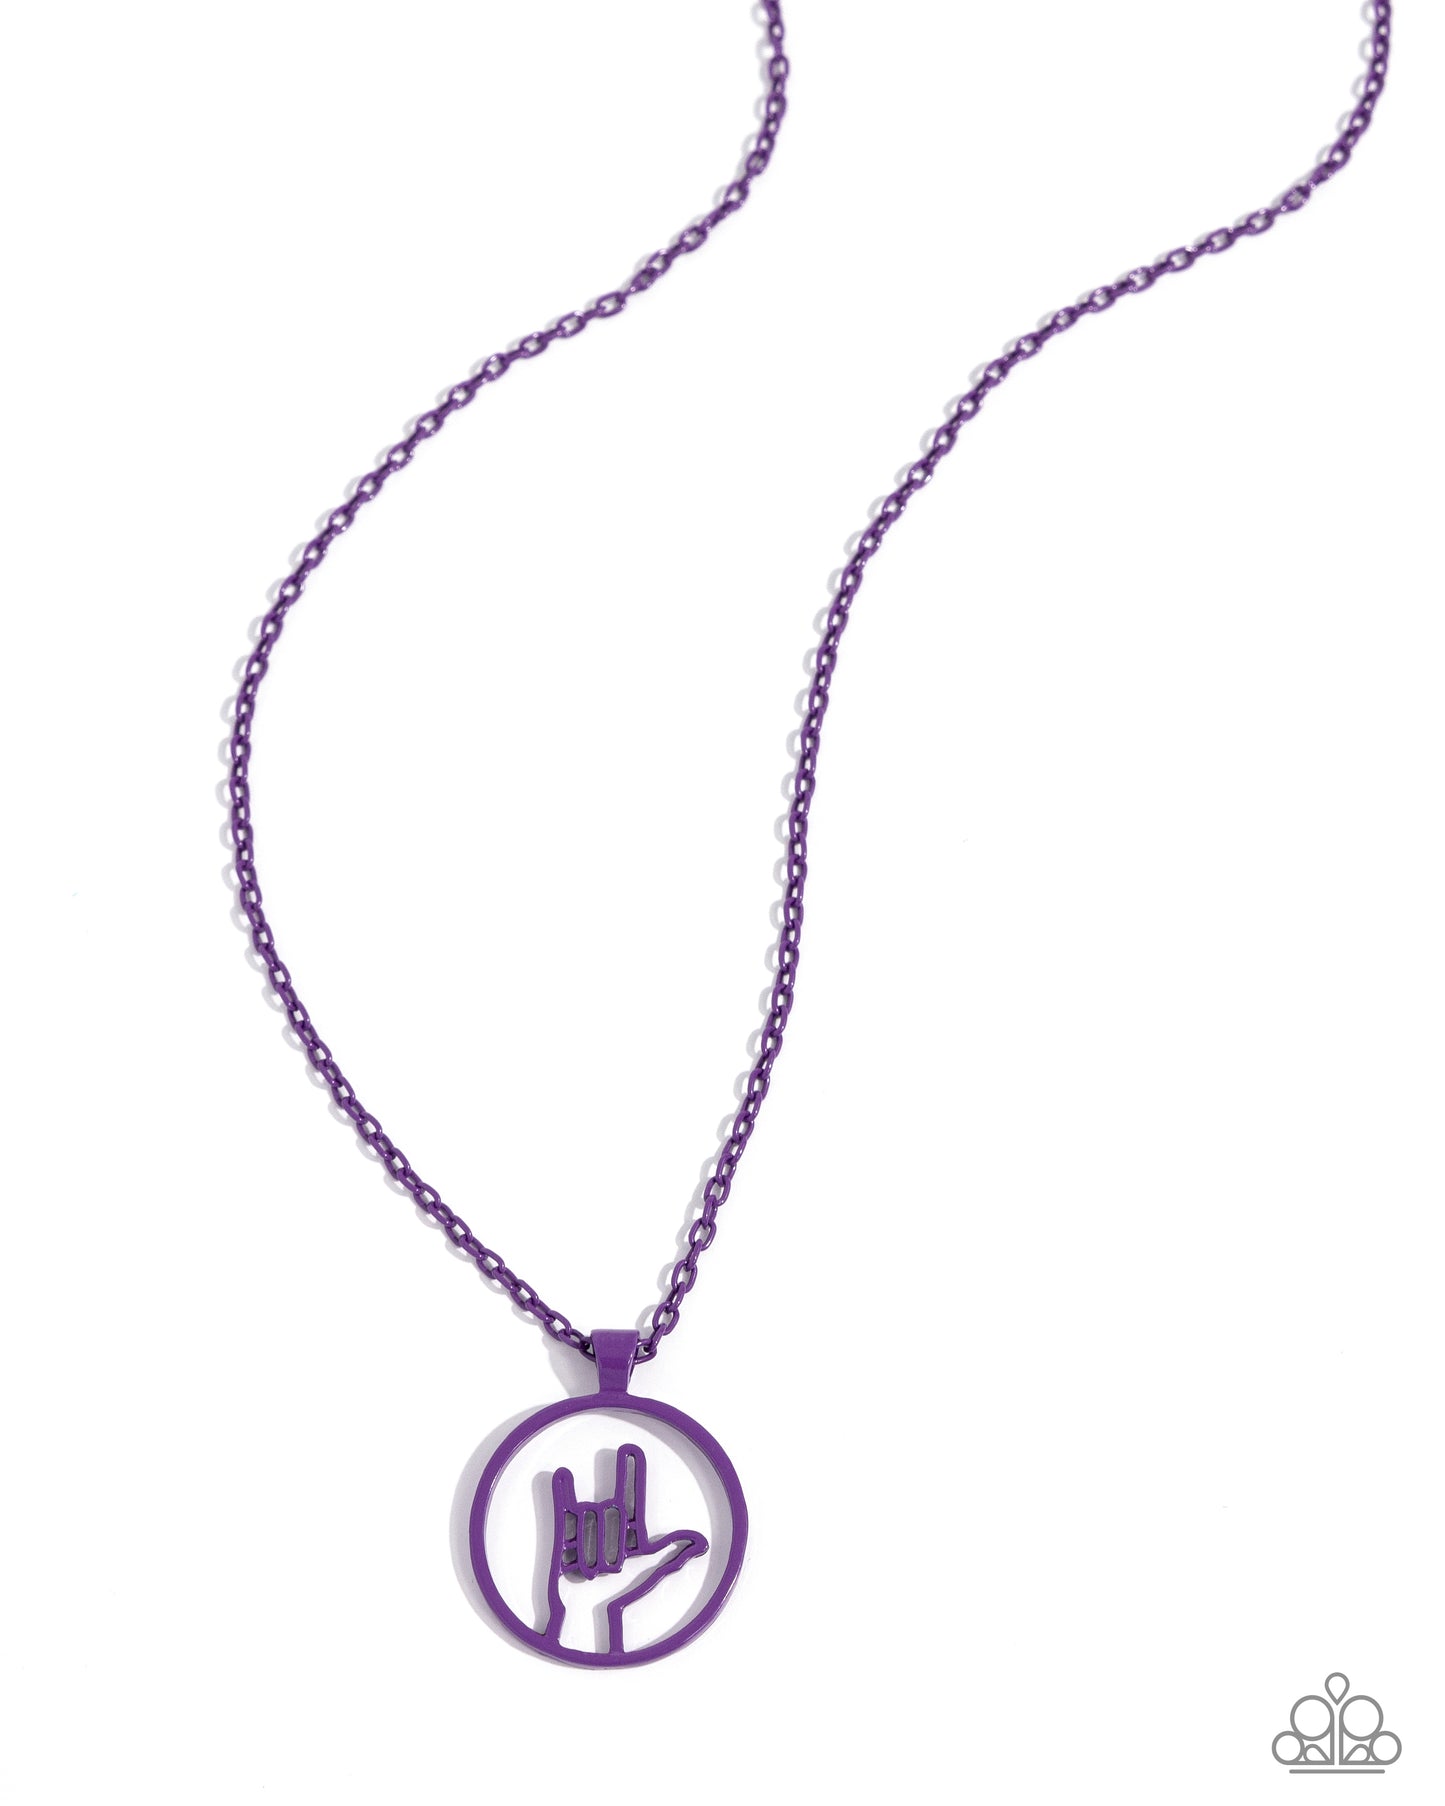 Abstract ASL Purple "I Love You" Necklace - Paparazzi Accessories Dipped in a vibrant purple hue, an airy pendant featuring an ASL "I love you" sign glides along a dainty chain for a colorful, visually interesting display. Features an adjustable clasp closure. Sold as one individual necklace. Includes one pair of matching earrings. SKU: P2DA-PRXX-153XX